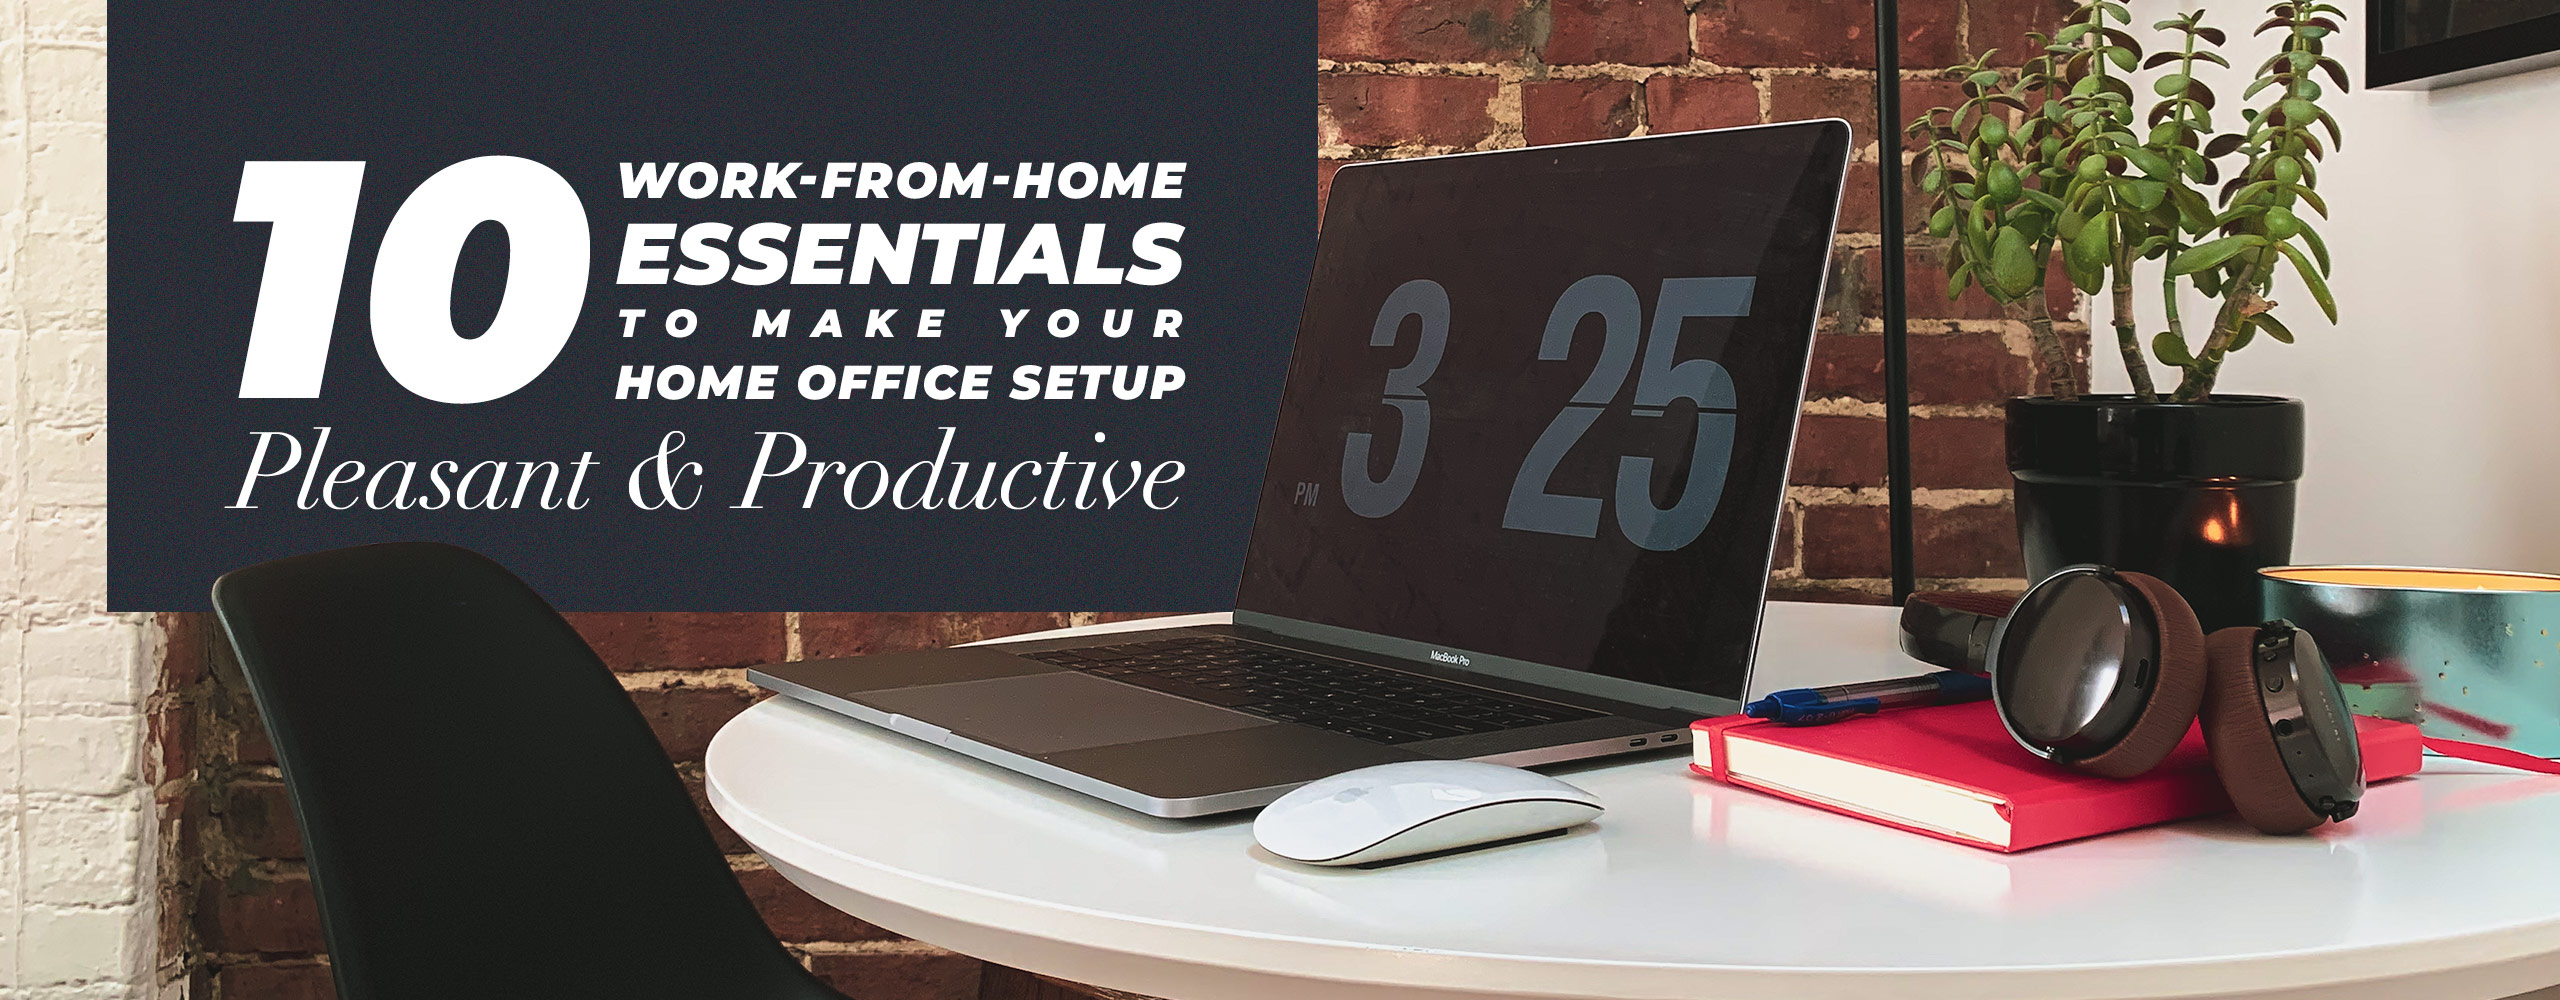 10 Work-From-Home Essentials To Make Your Home Office Setup More Pleasant And Productive